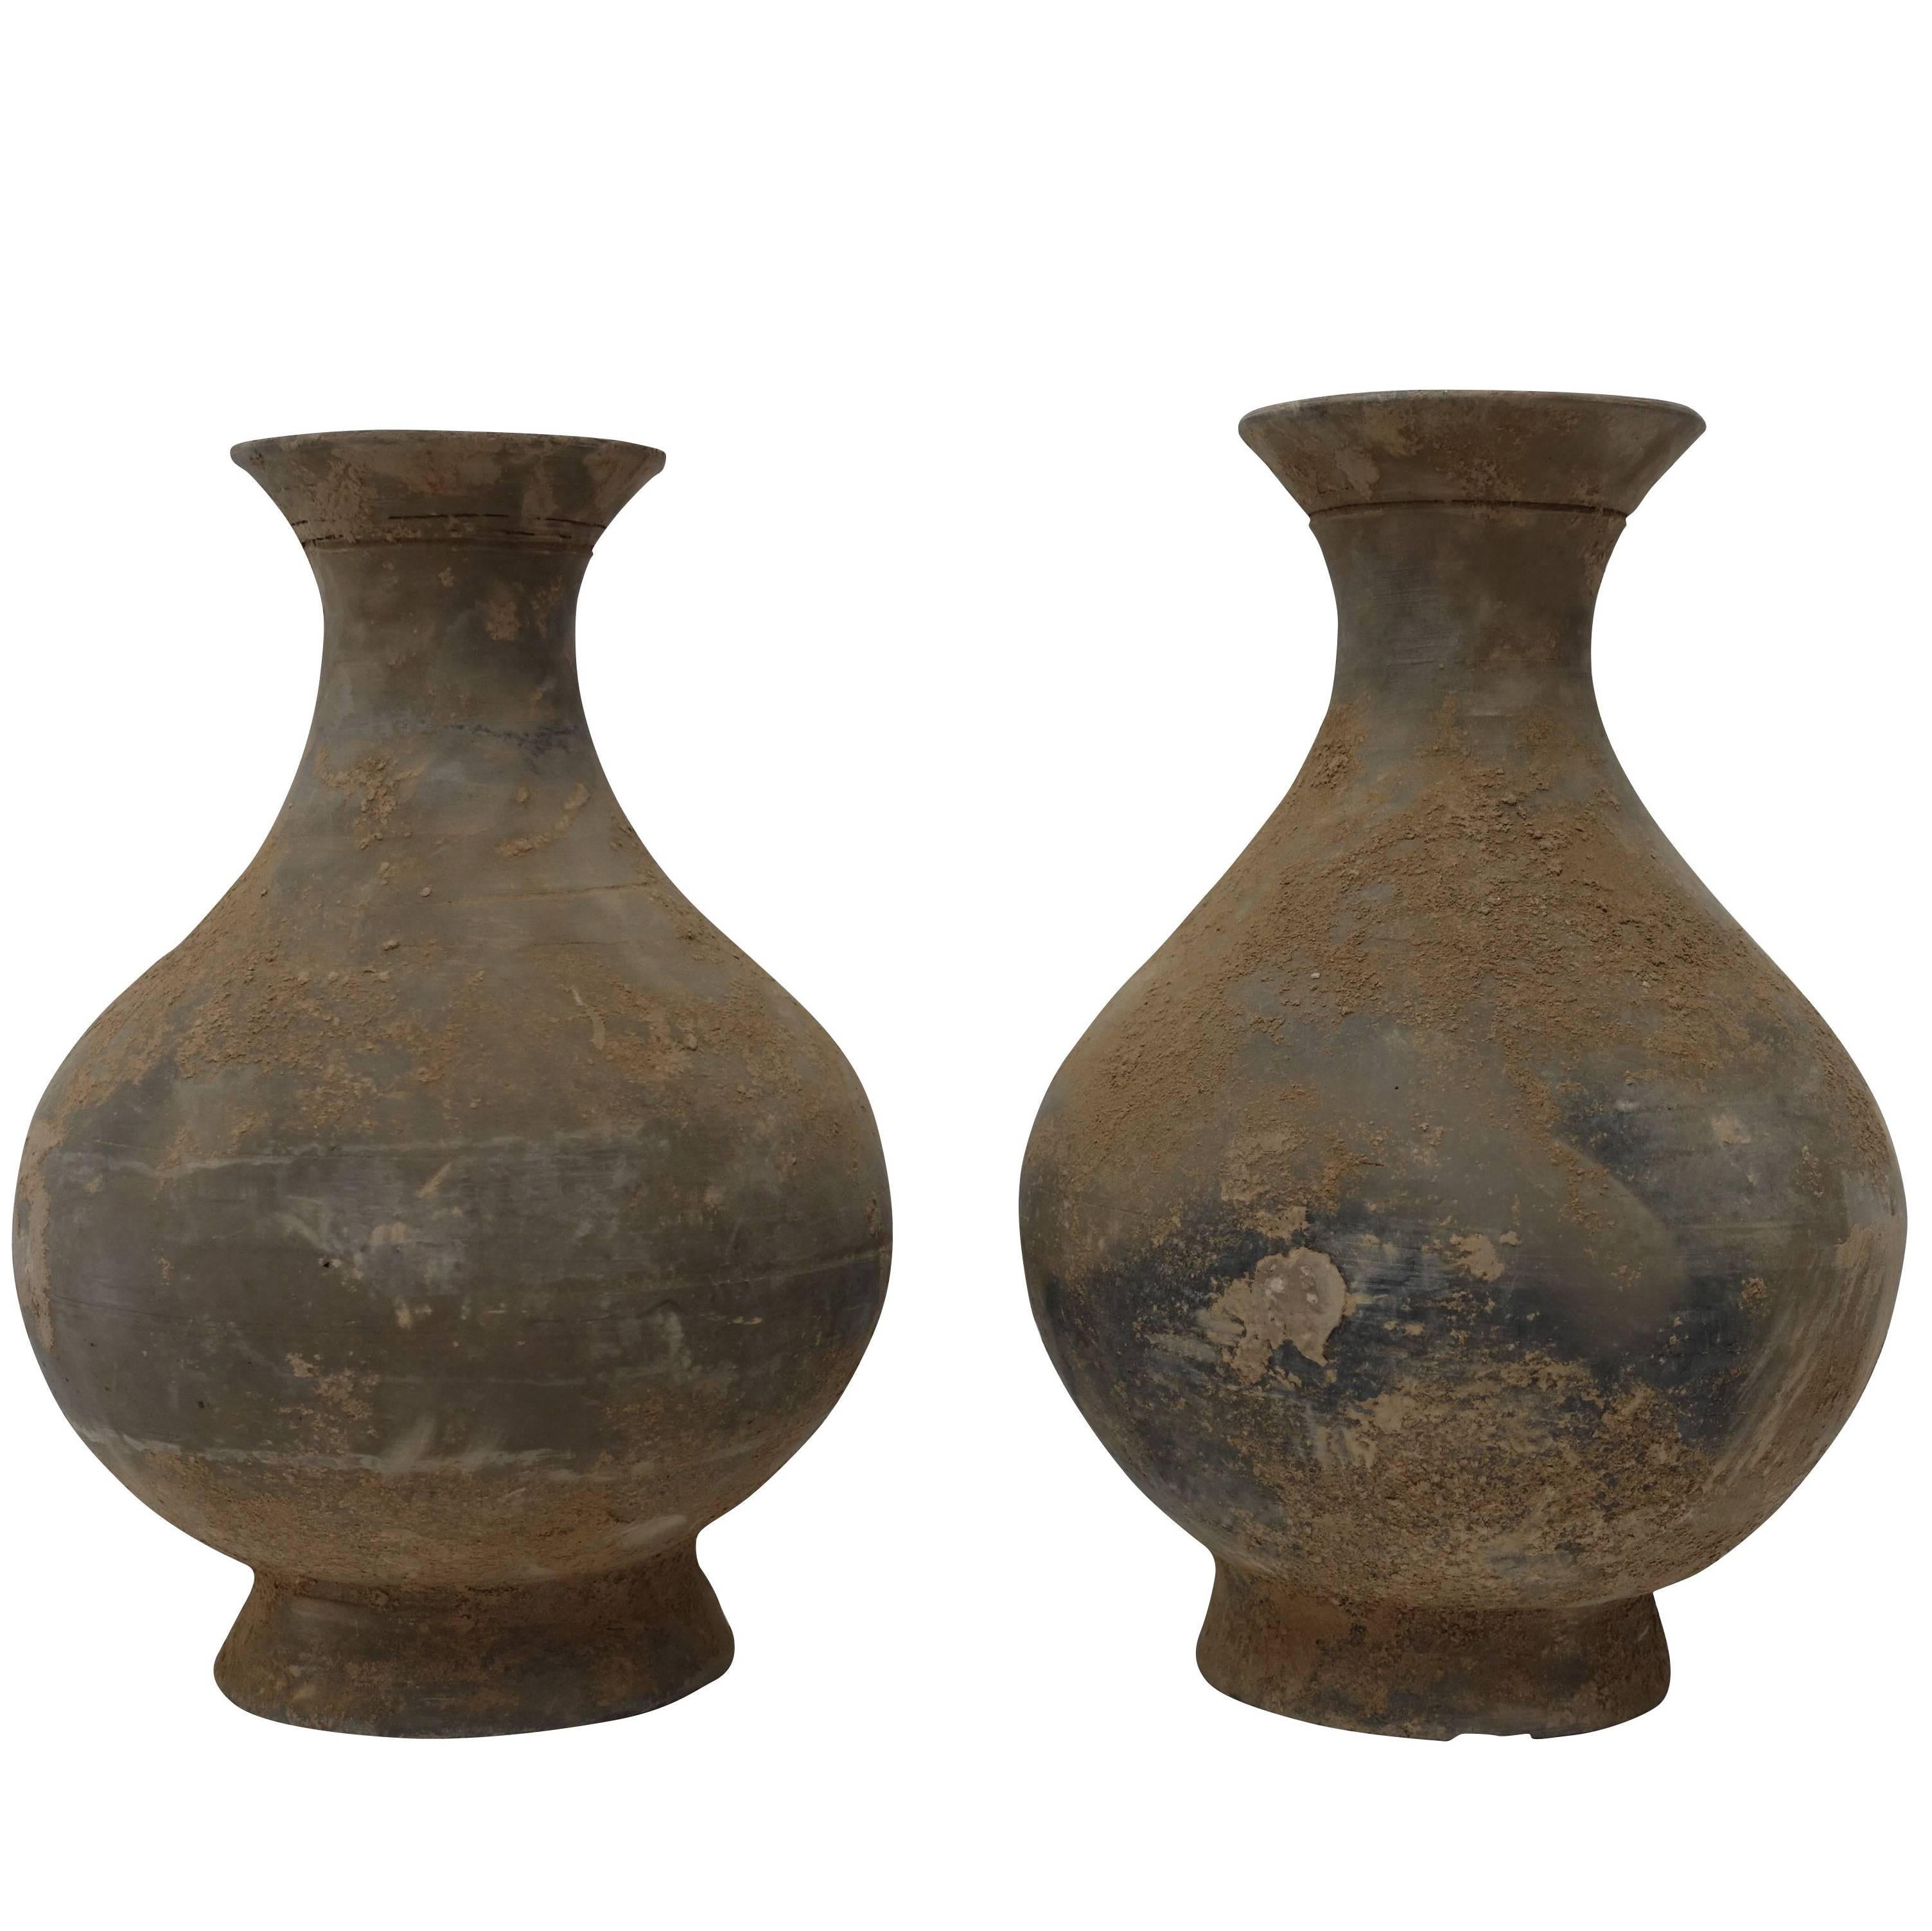 Pair of Dusted Terra Cotta Vases, China, Contemporary